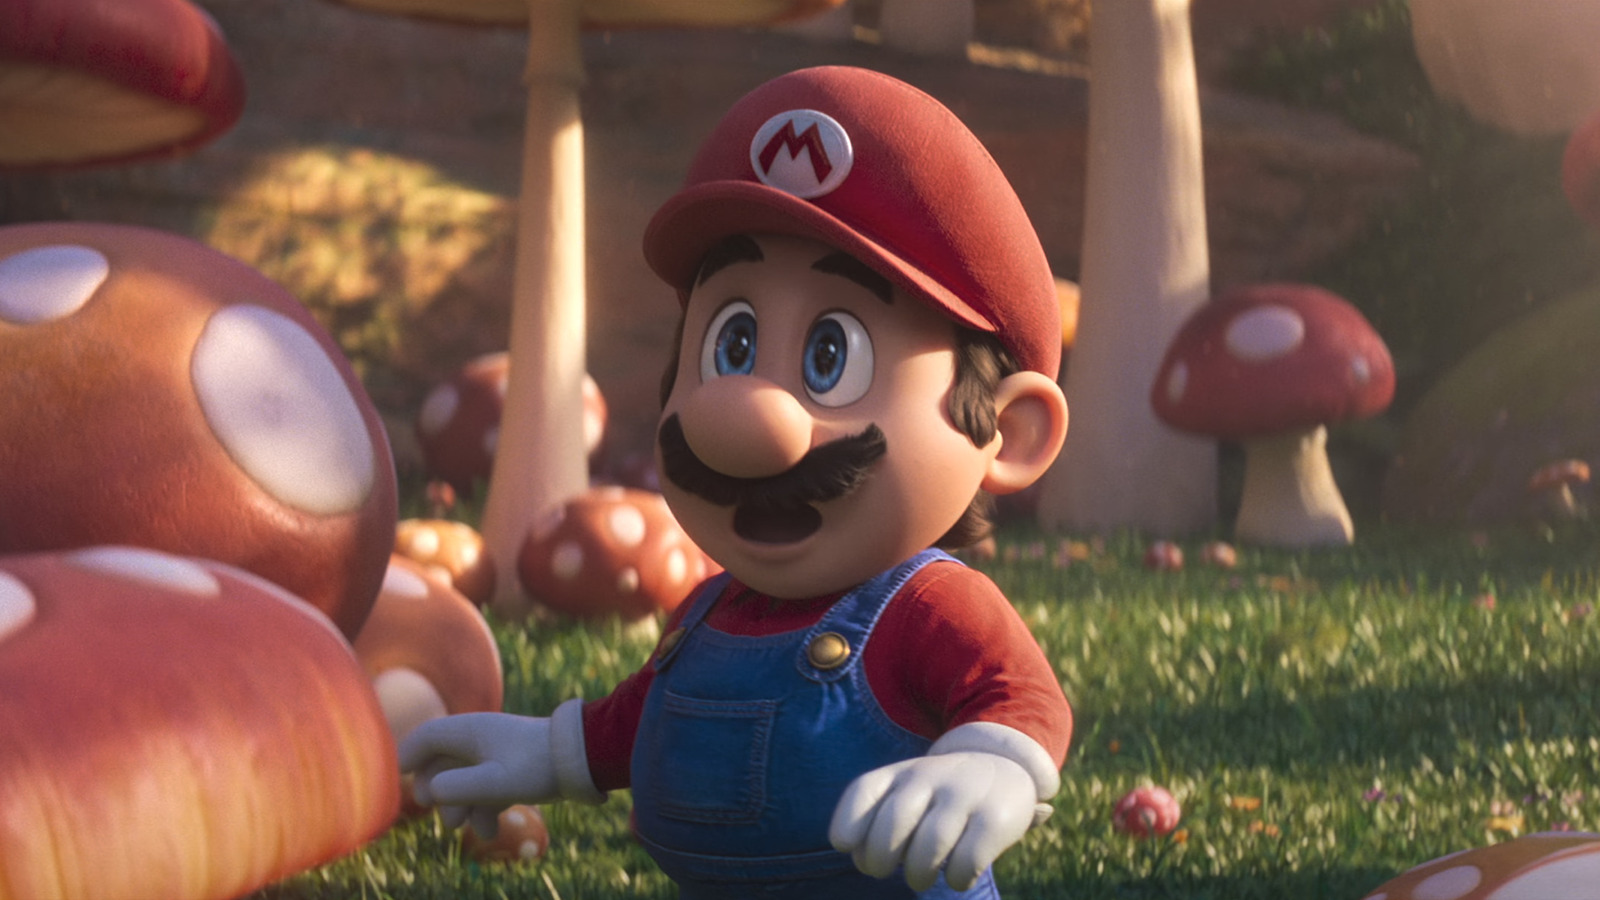 Even Netflix is ditching Mario at the end of March – Destructoid